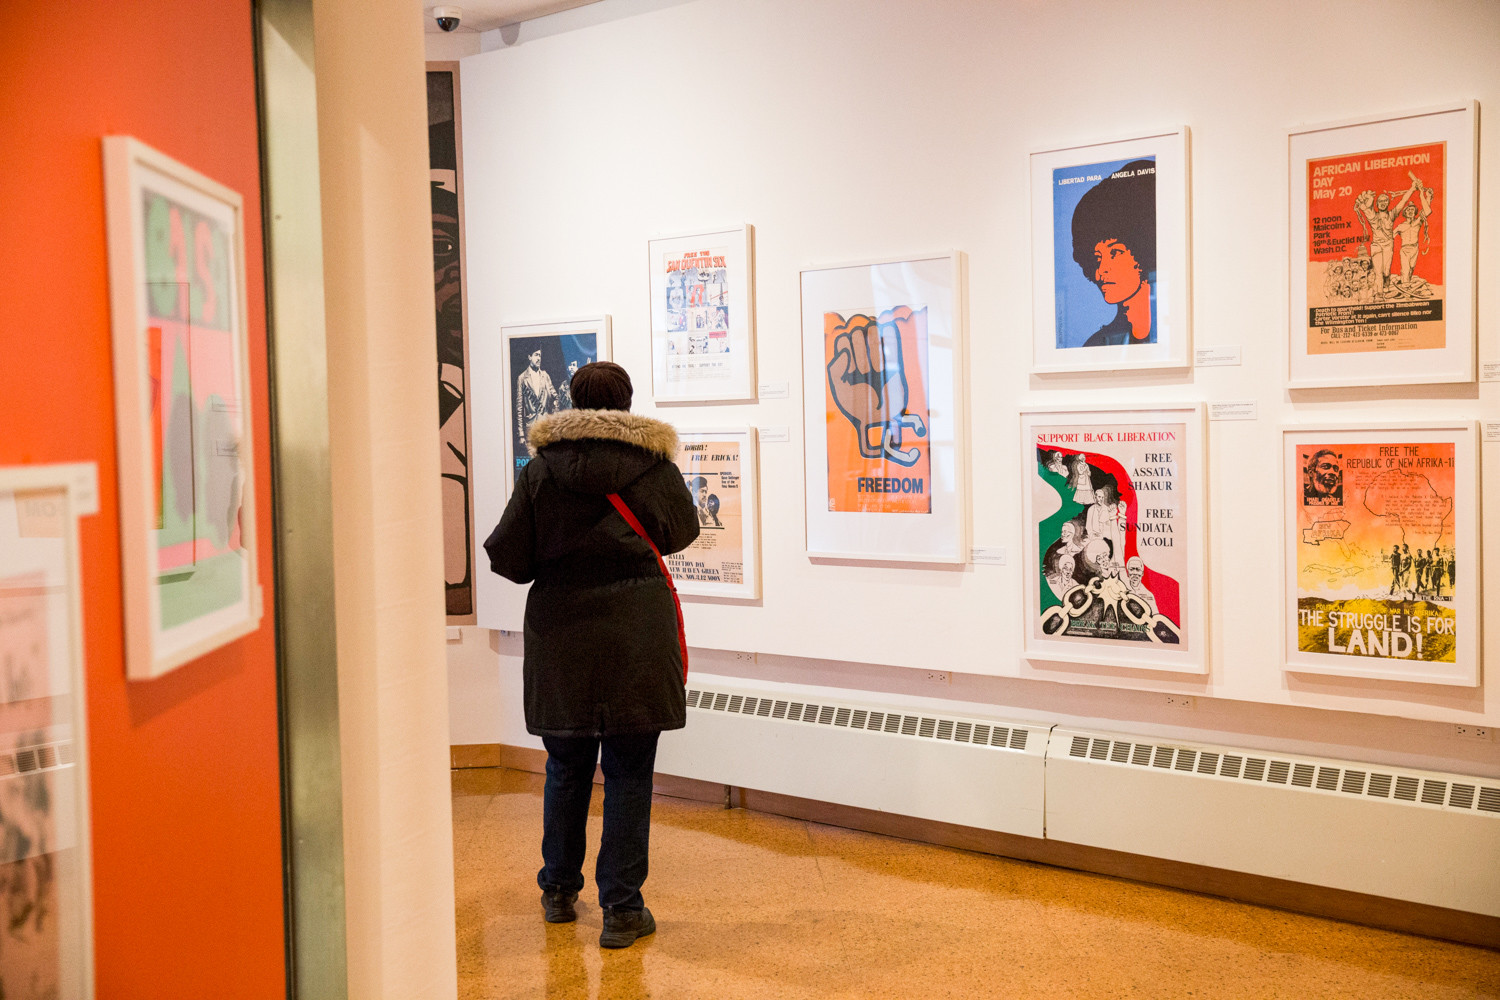 The posters of the black power movement were ‘the social media and digital design of the 1960s and 1970s,’ says Sylviane Diouf, the exhibition’s co-curator. It was a way to get the message out to the community and inform them of events like art and culture gatherings and the support the freeing of political prisoners.